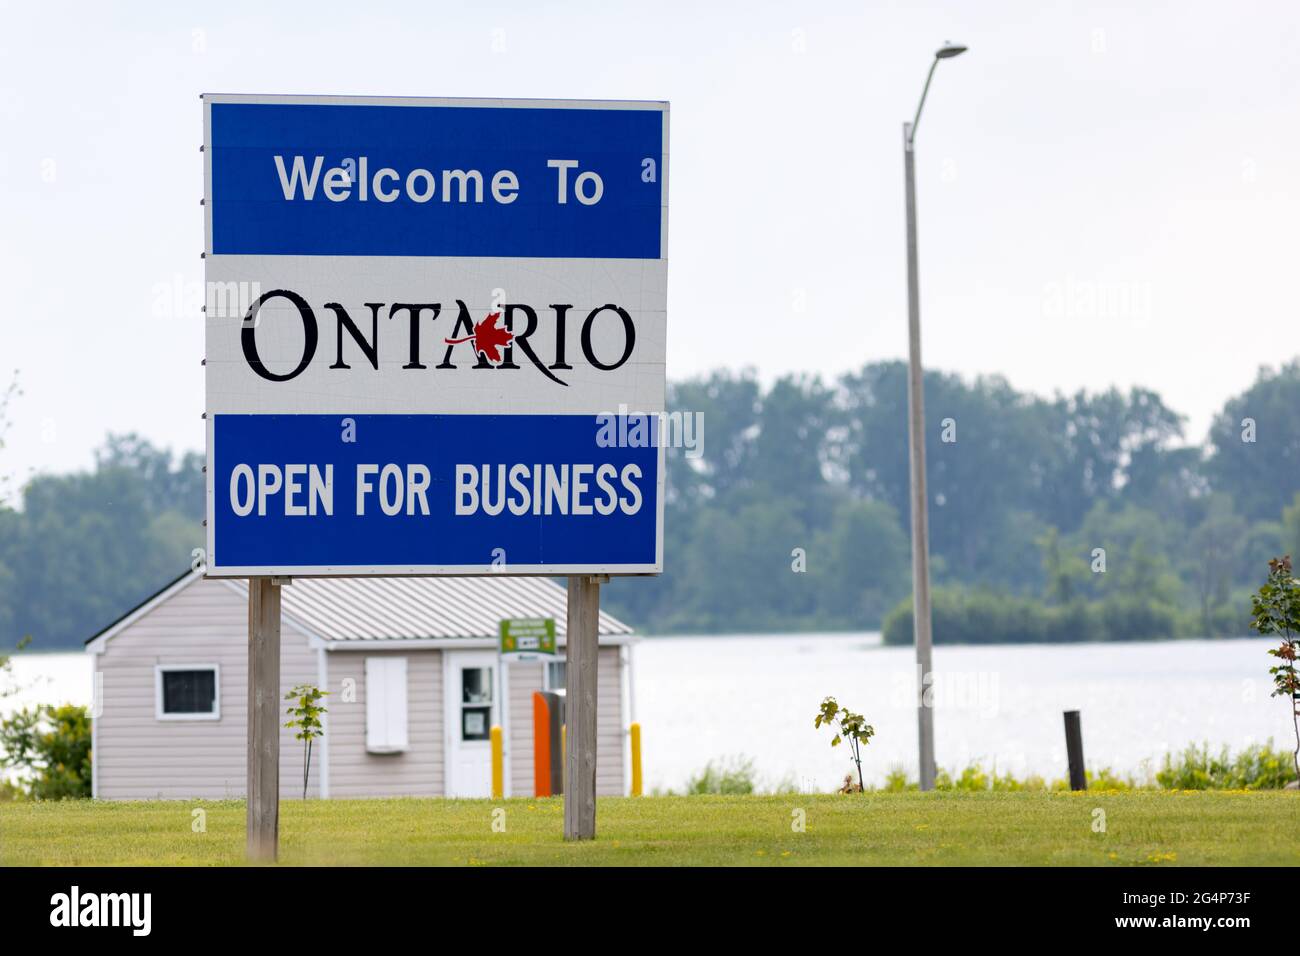 Hawkesbury, Ontario, Canada - June 21, 2021: A sign on Ile de Chenail welcomes motorists crossing from Grenville, Quebec to Ontario with the 'Open for Stock Photo